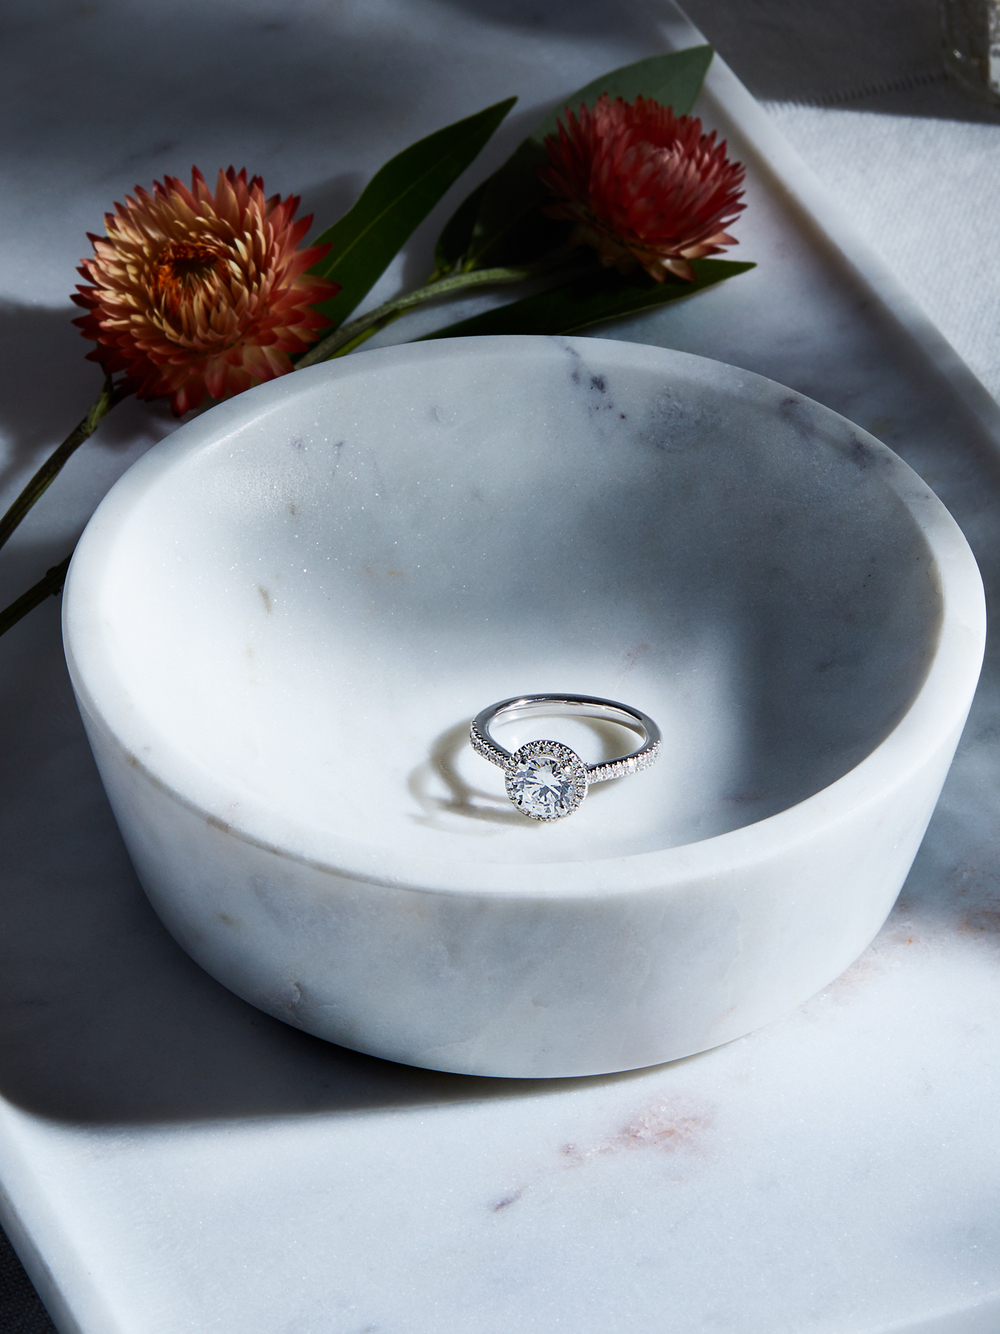 Diamond ring in a marble bowl 